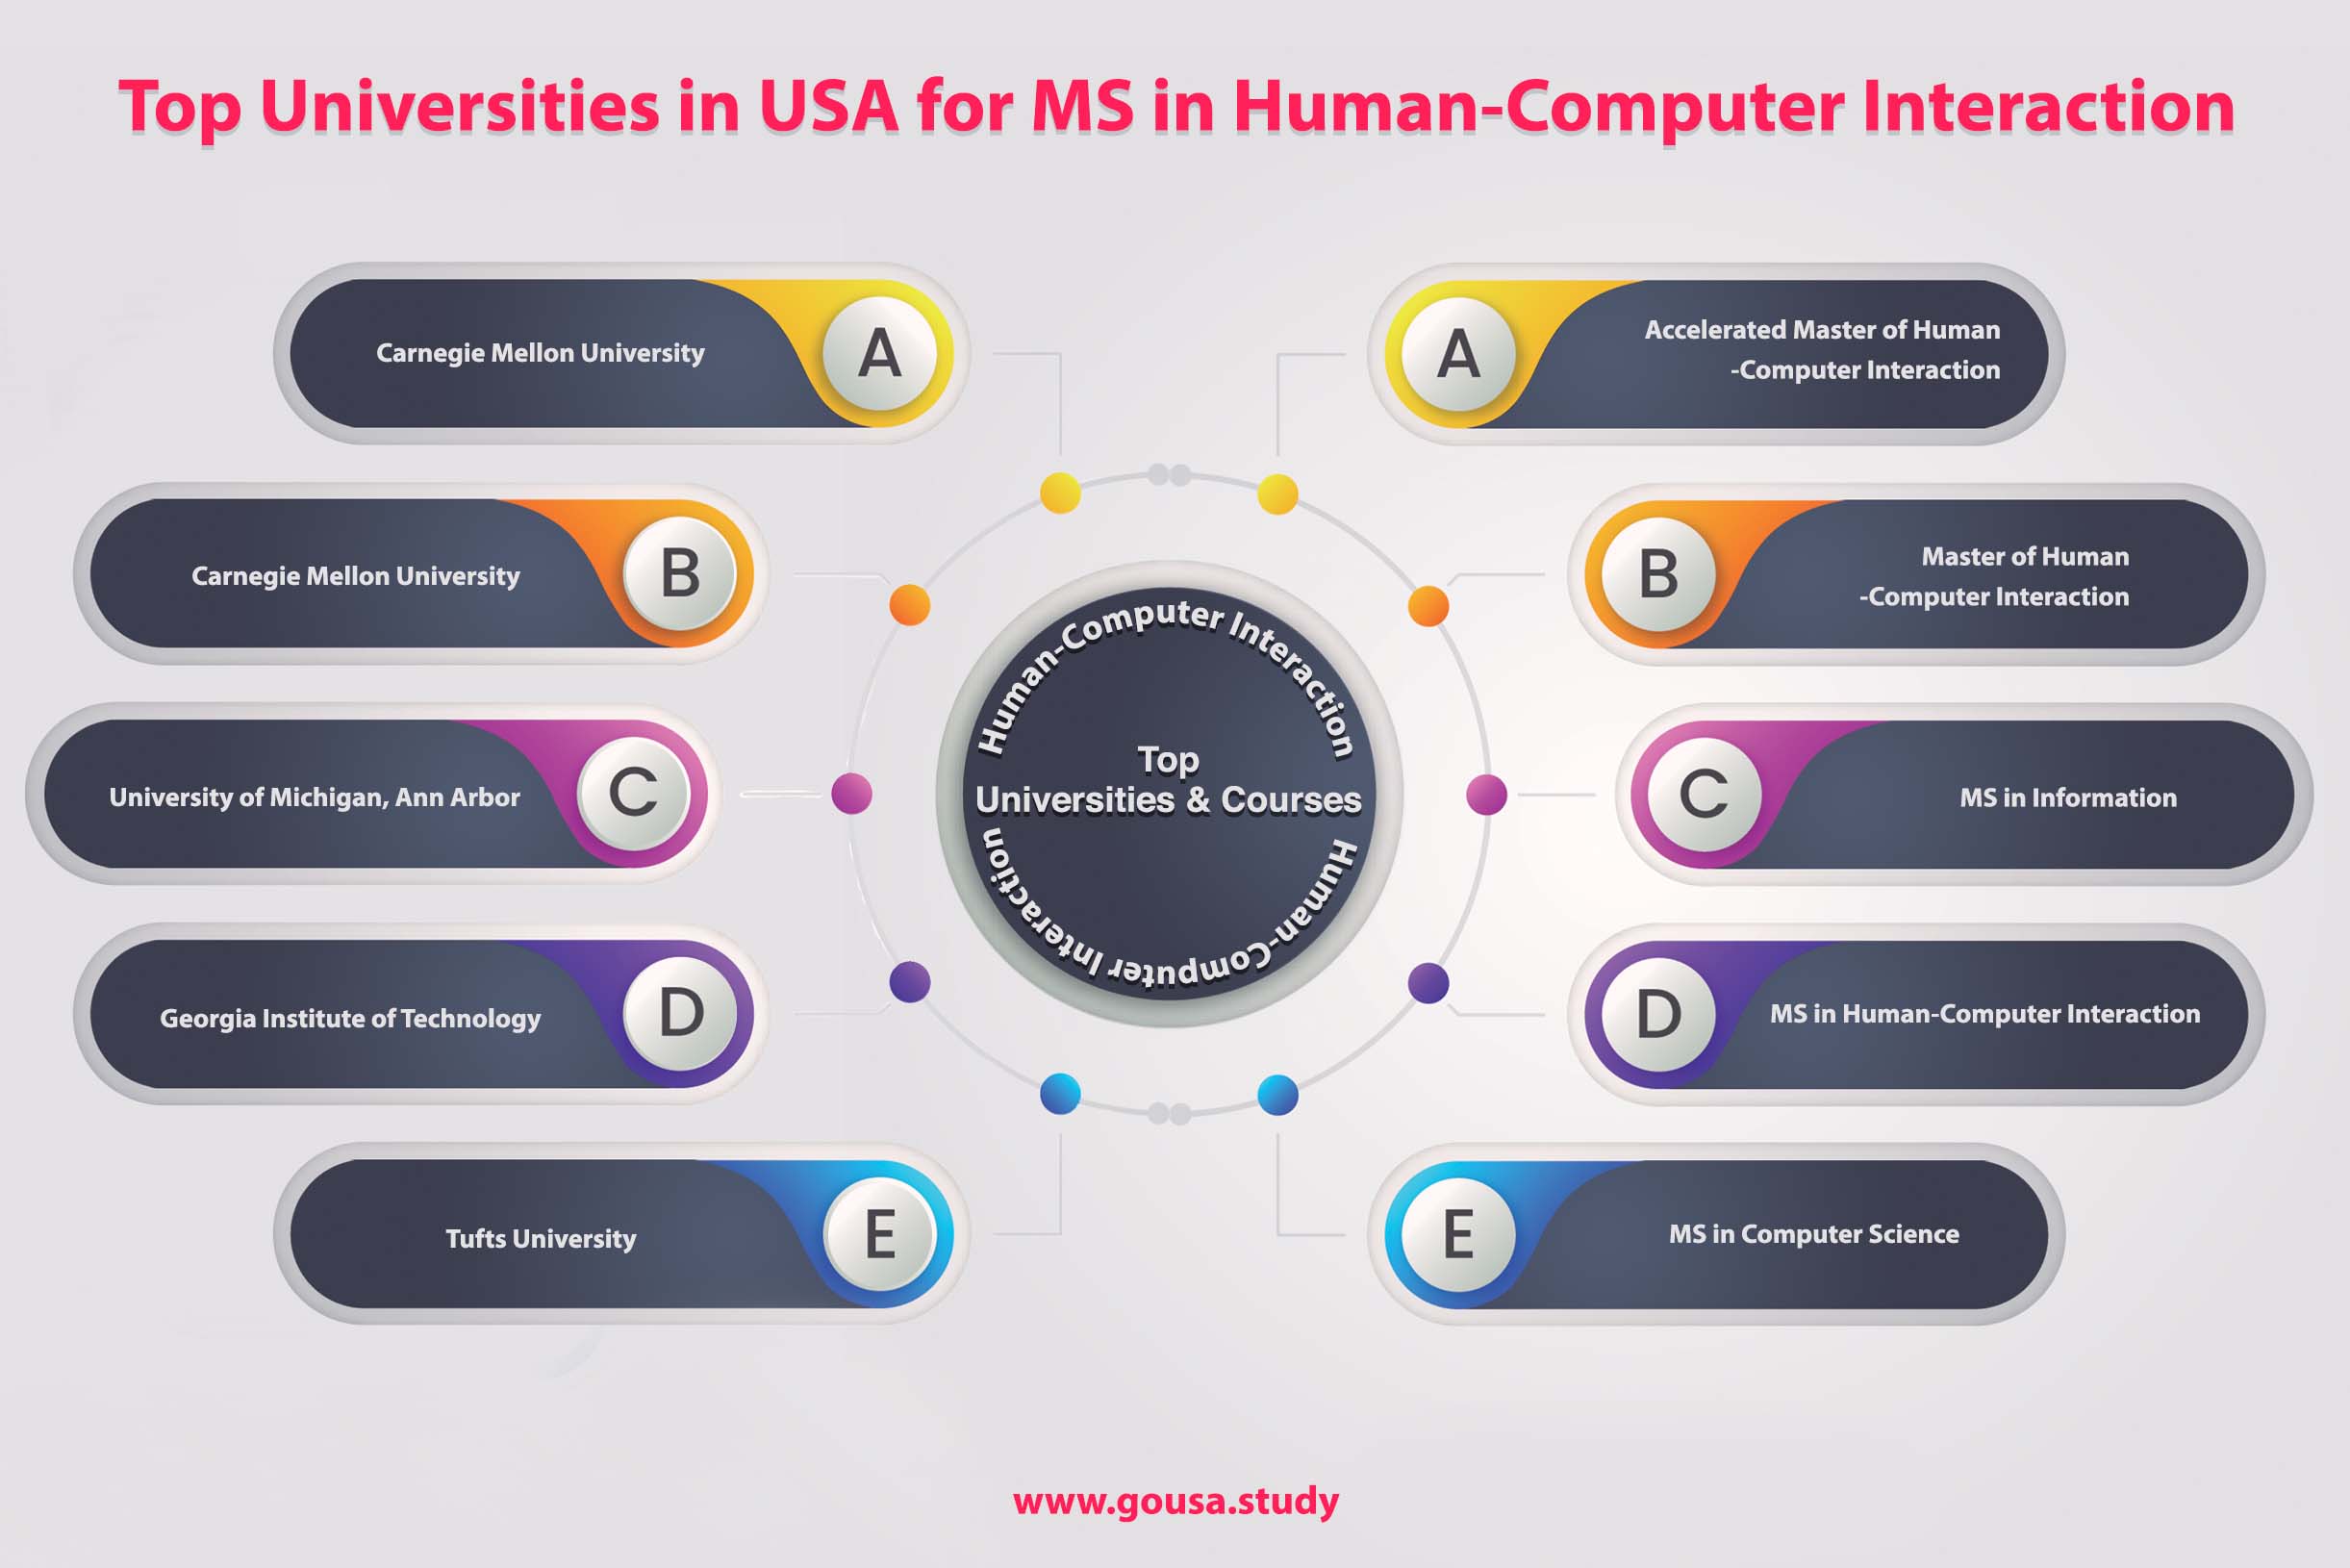 Top Universities in USA for MS in Human Computer Interaction